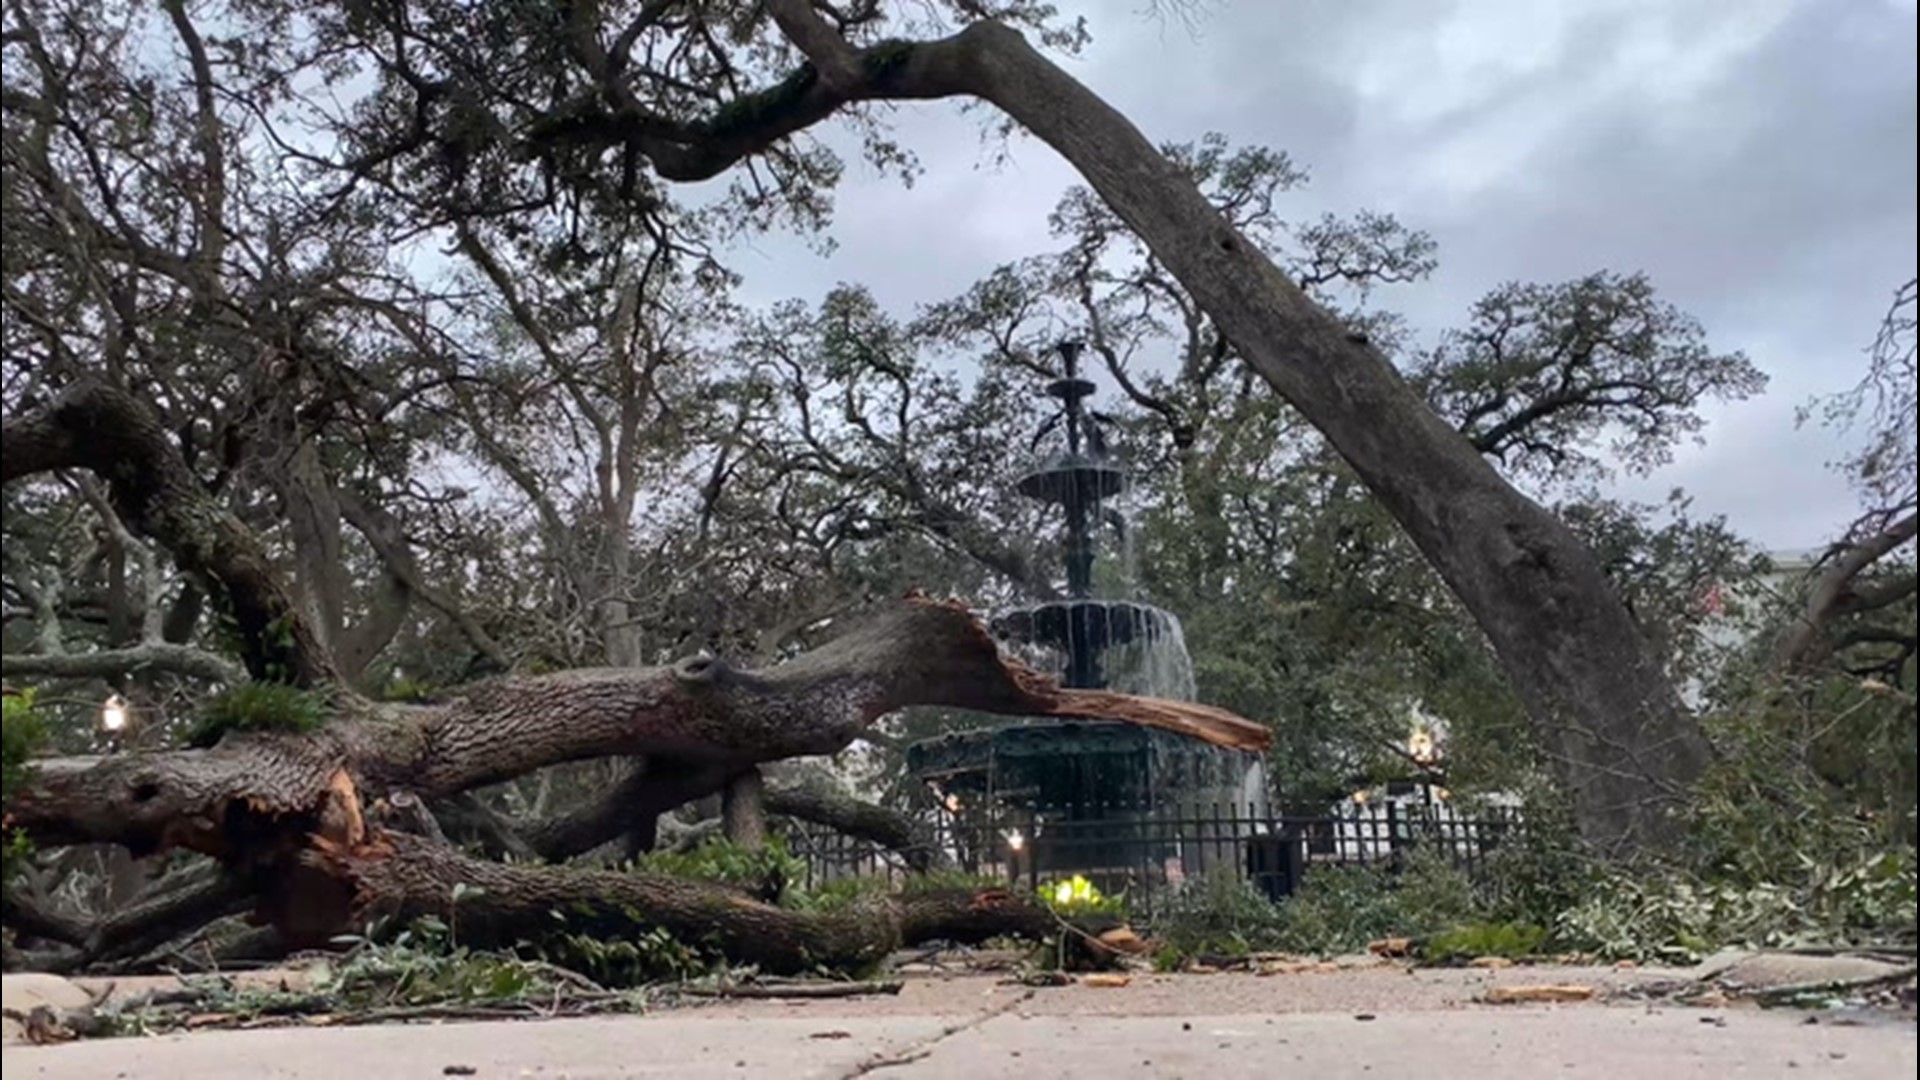 Residents of Mobile, Alabama, expressed heartbreak after Hurricane Sally left many oak trees at historic Bienville Square torn from the roots on Sept. 17.